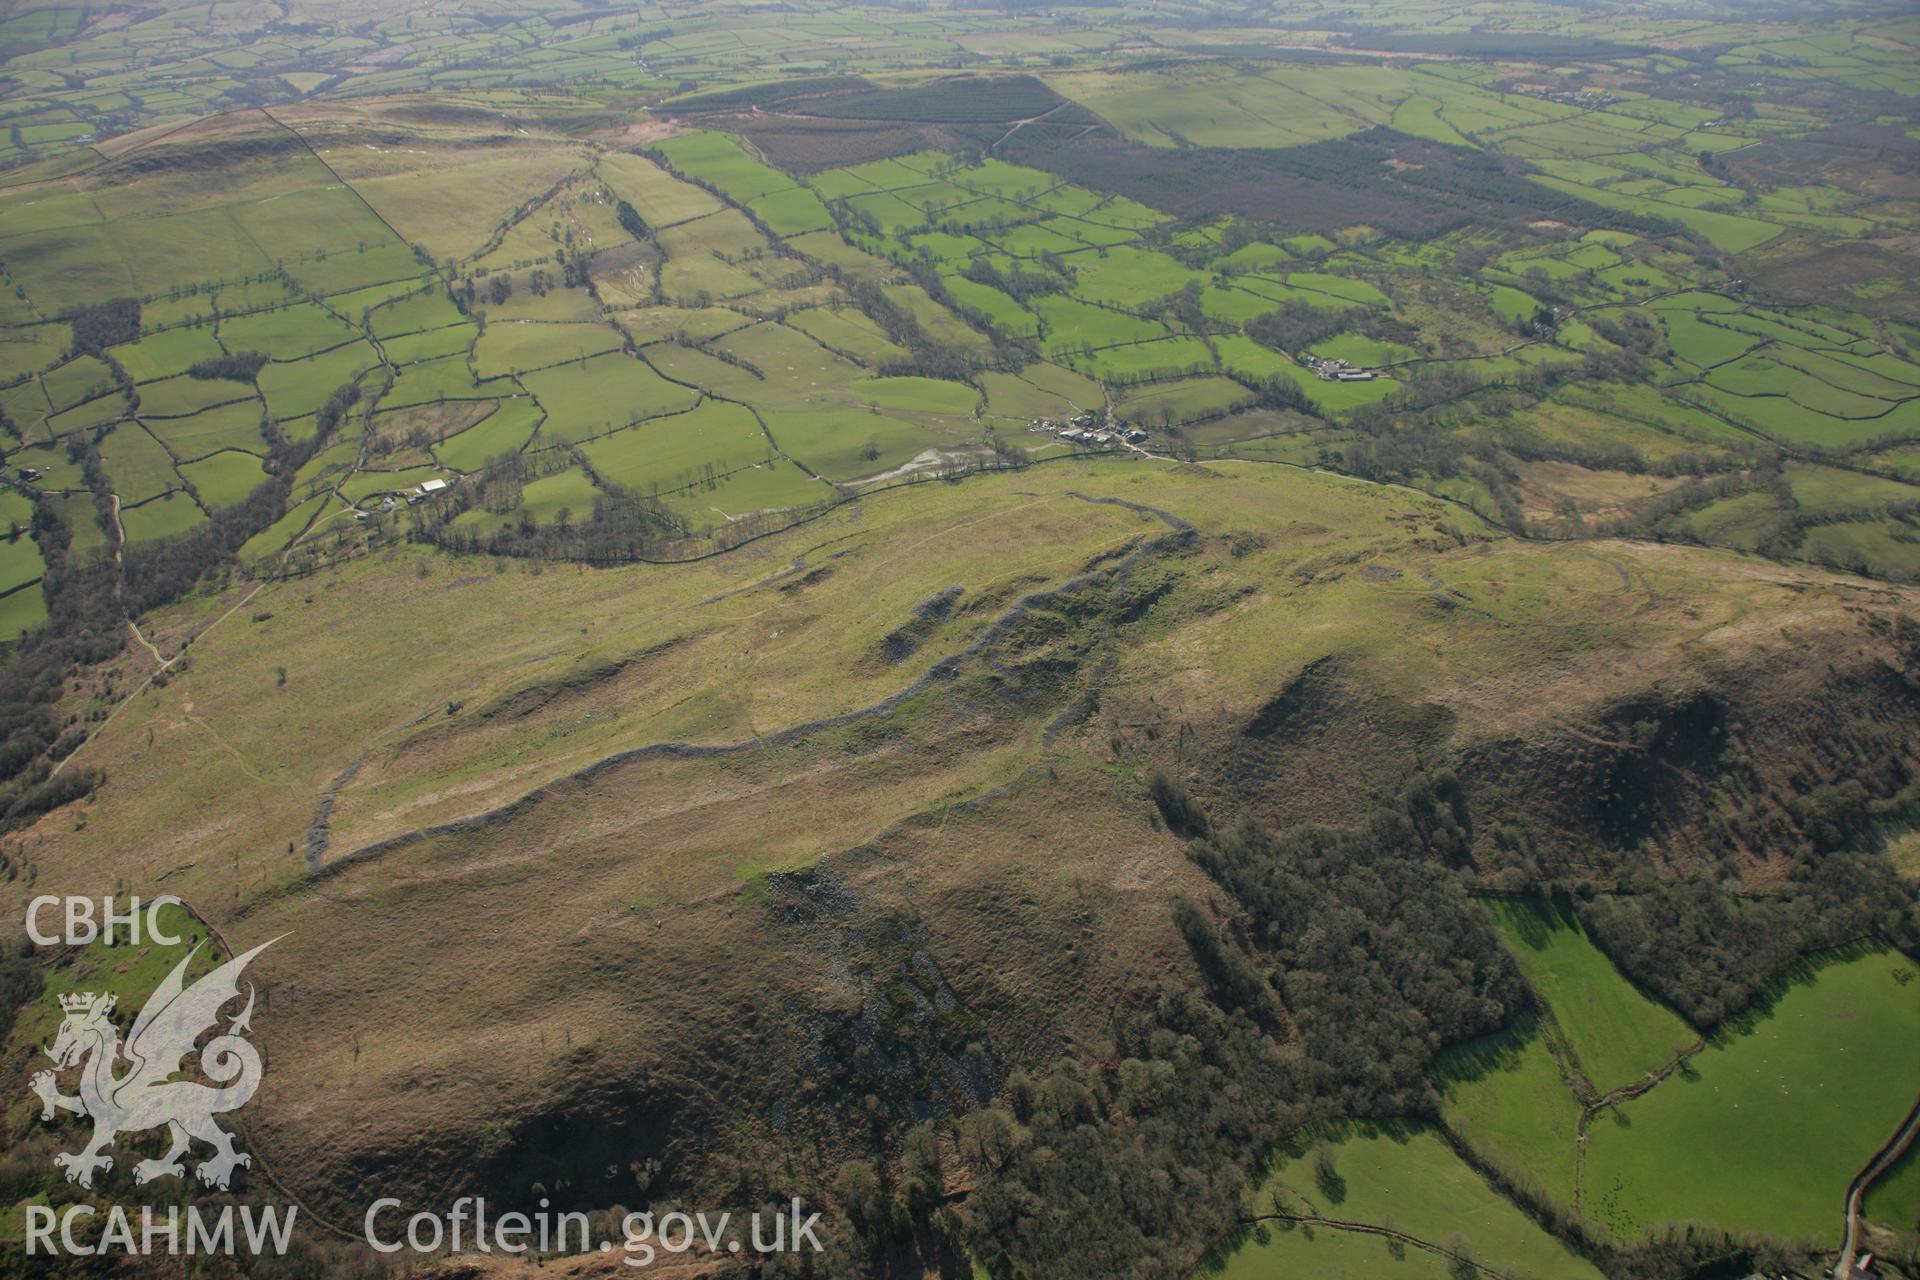 RCAHMW colour oblique aerial photograph of Y Gaer Fawr Hillfort on Carn Goch. Taken on 21 March 2007 by Toby Driver